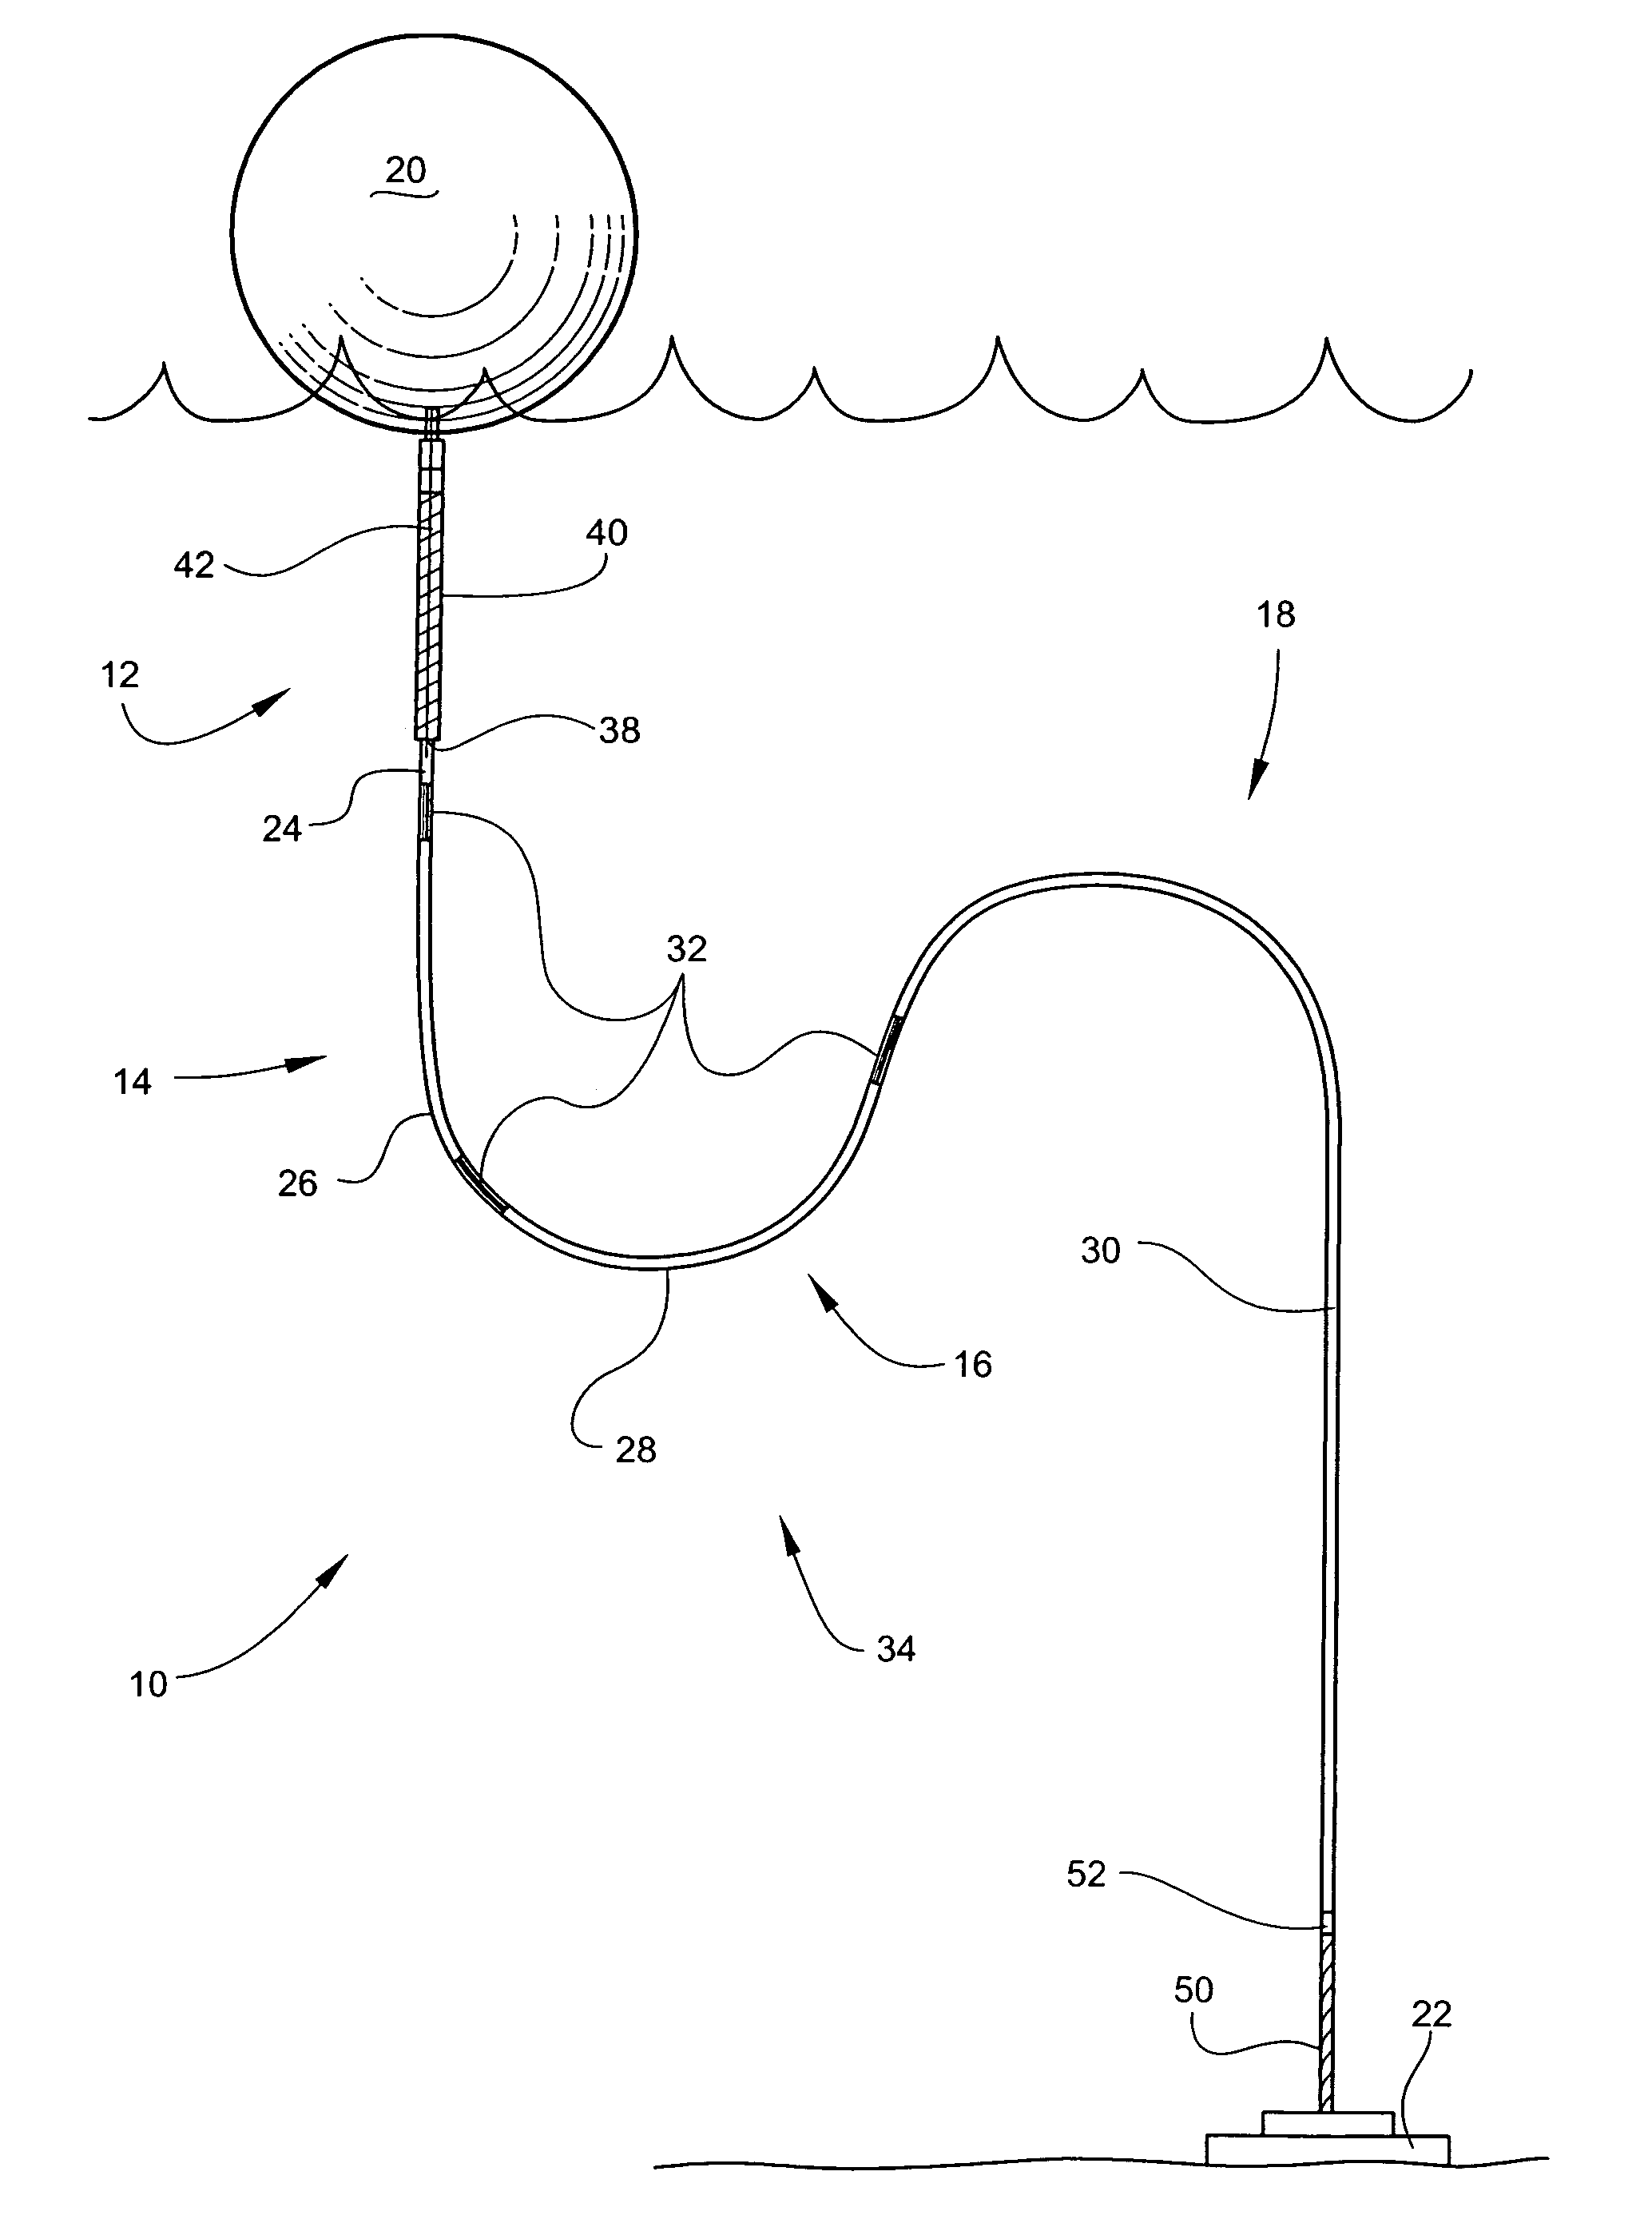 Mooring line for an oceanographic buoy system